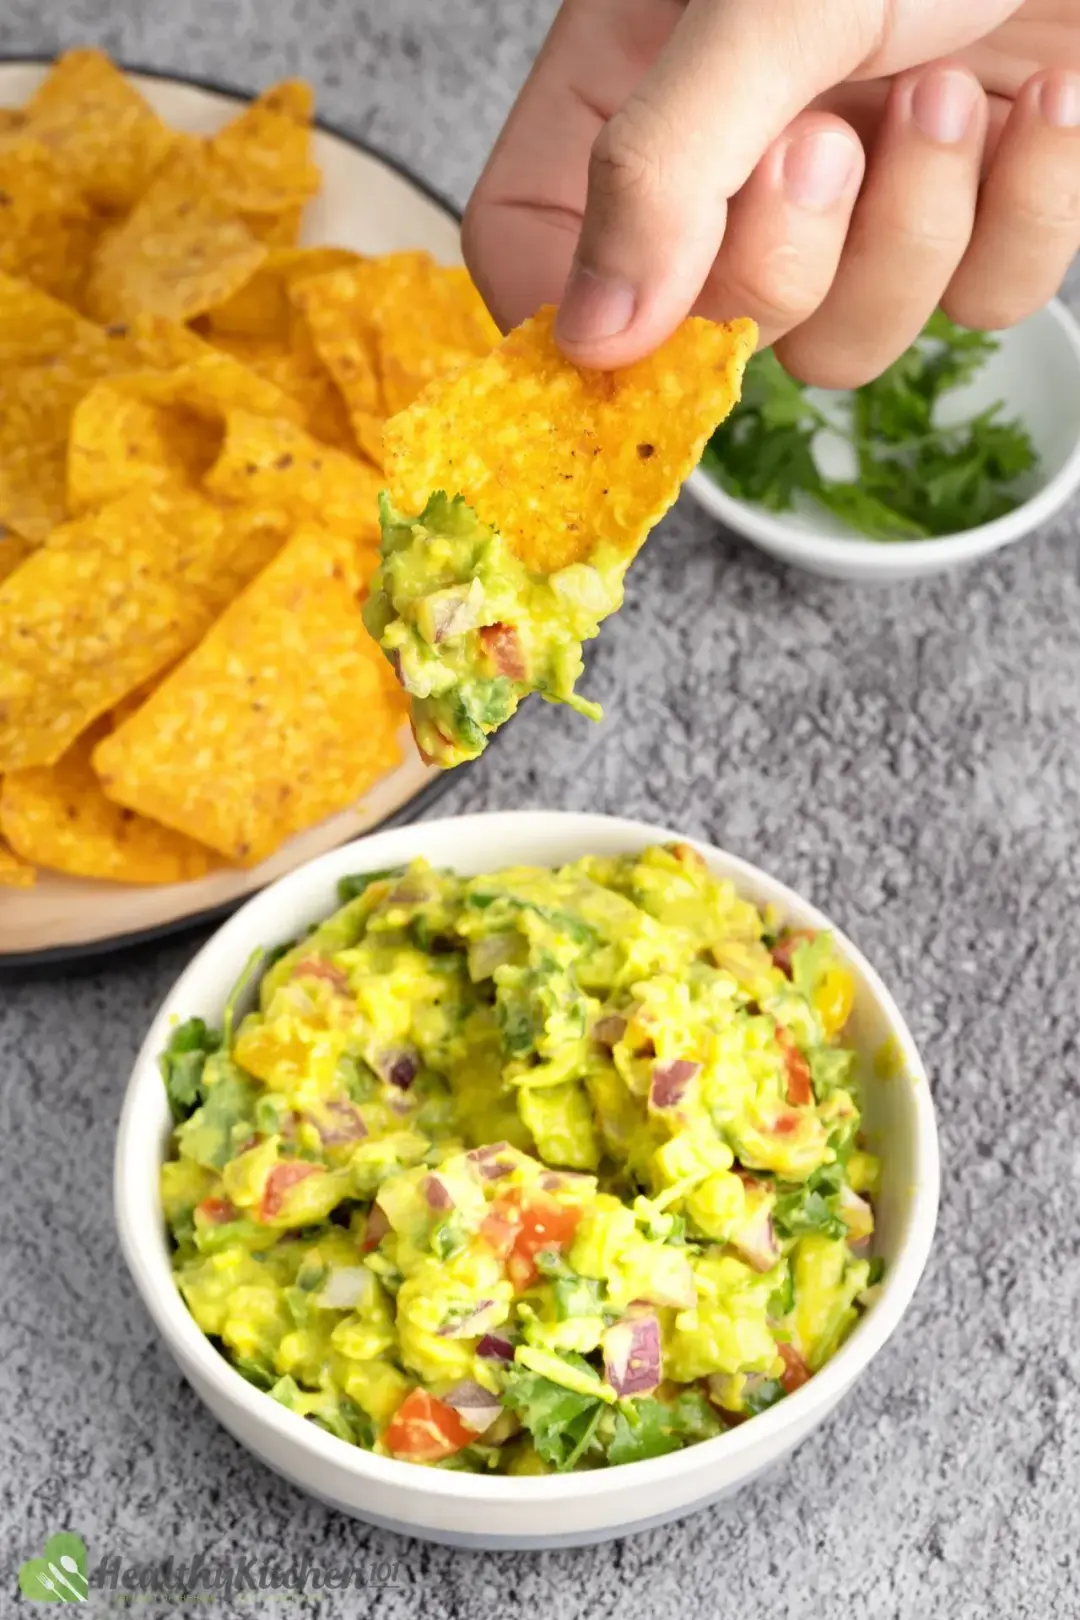 What can you eat with Guacamole